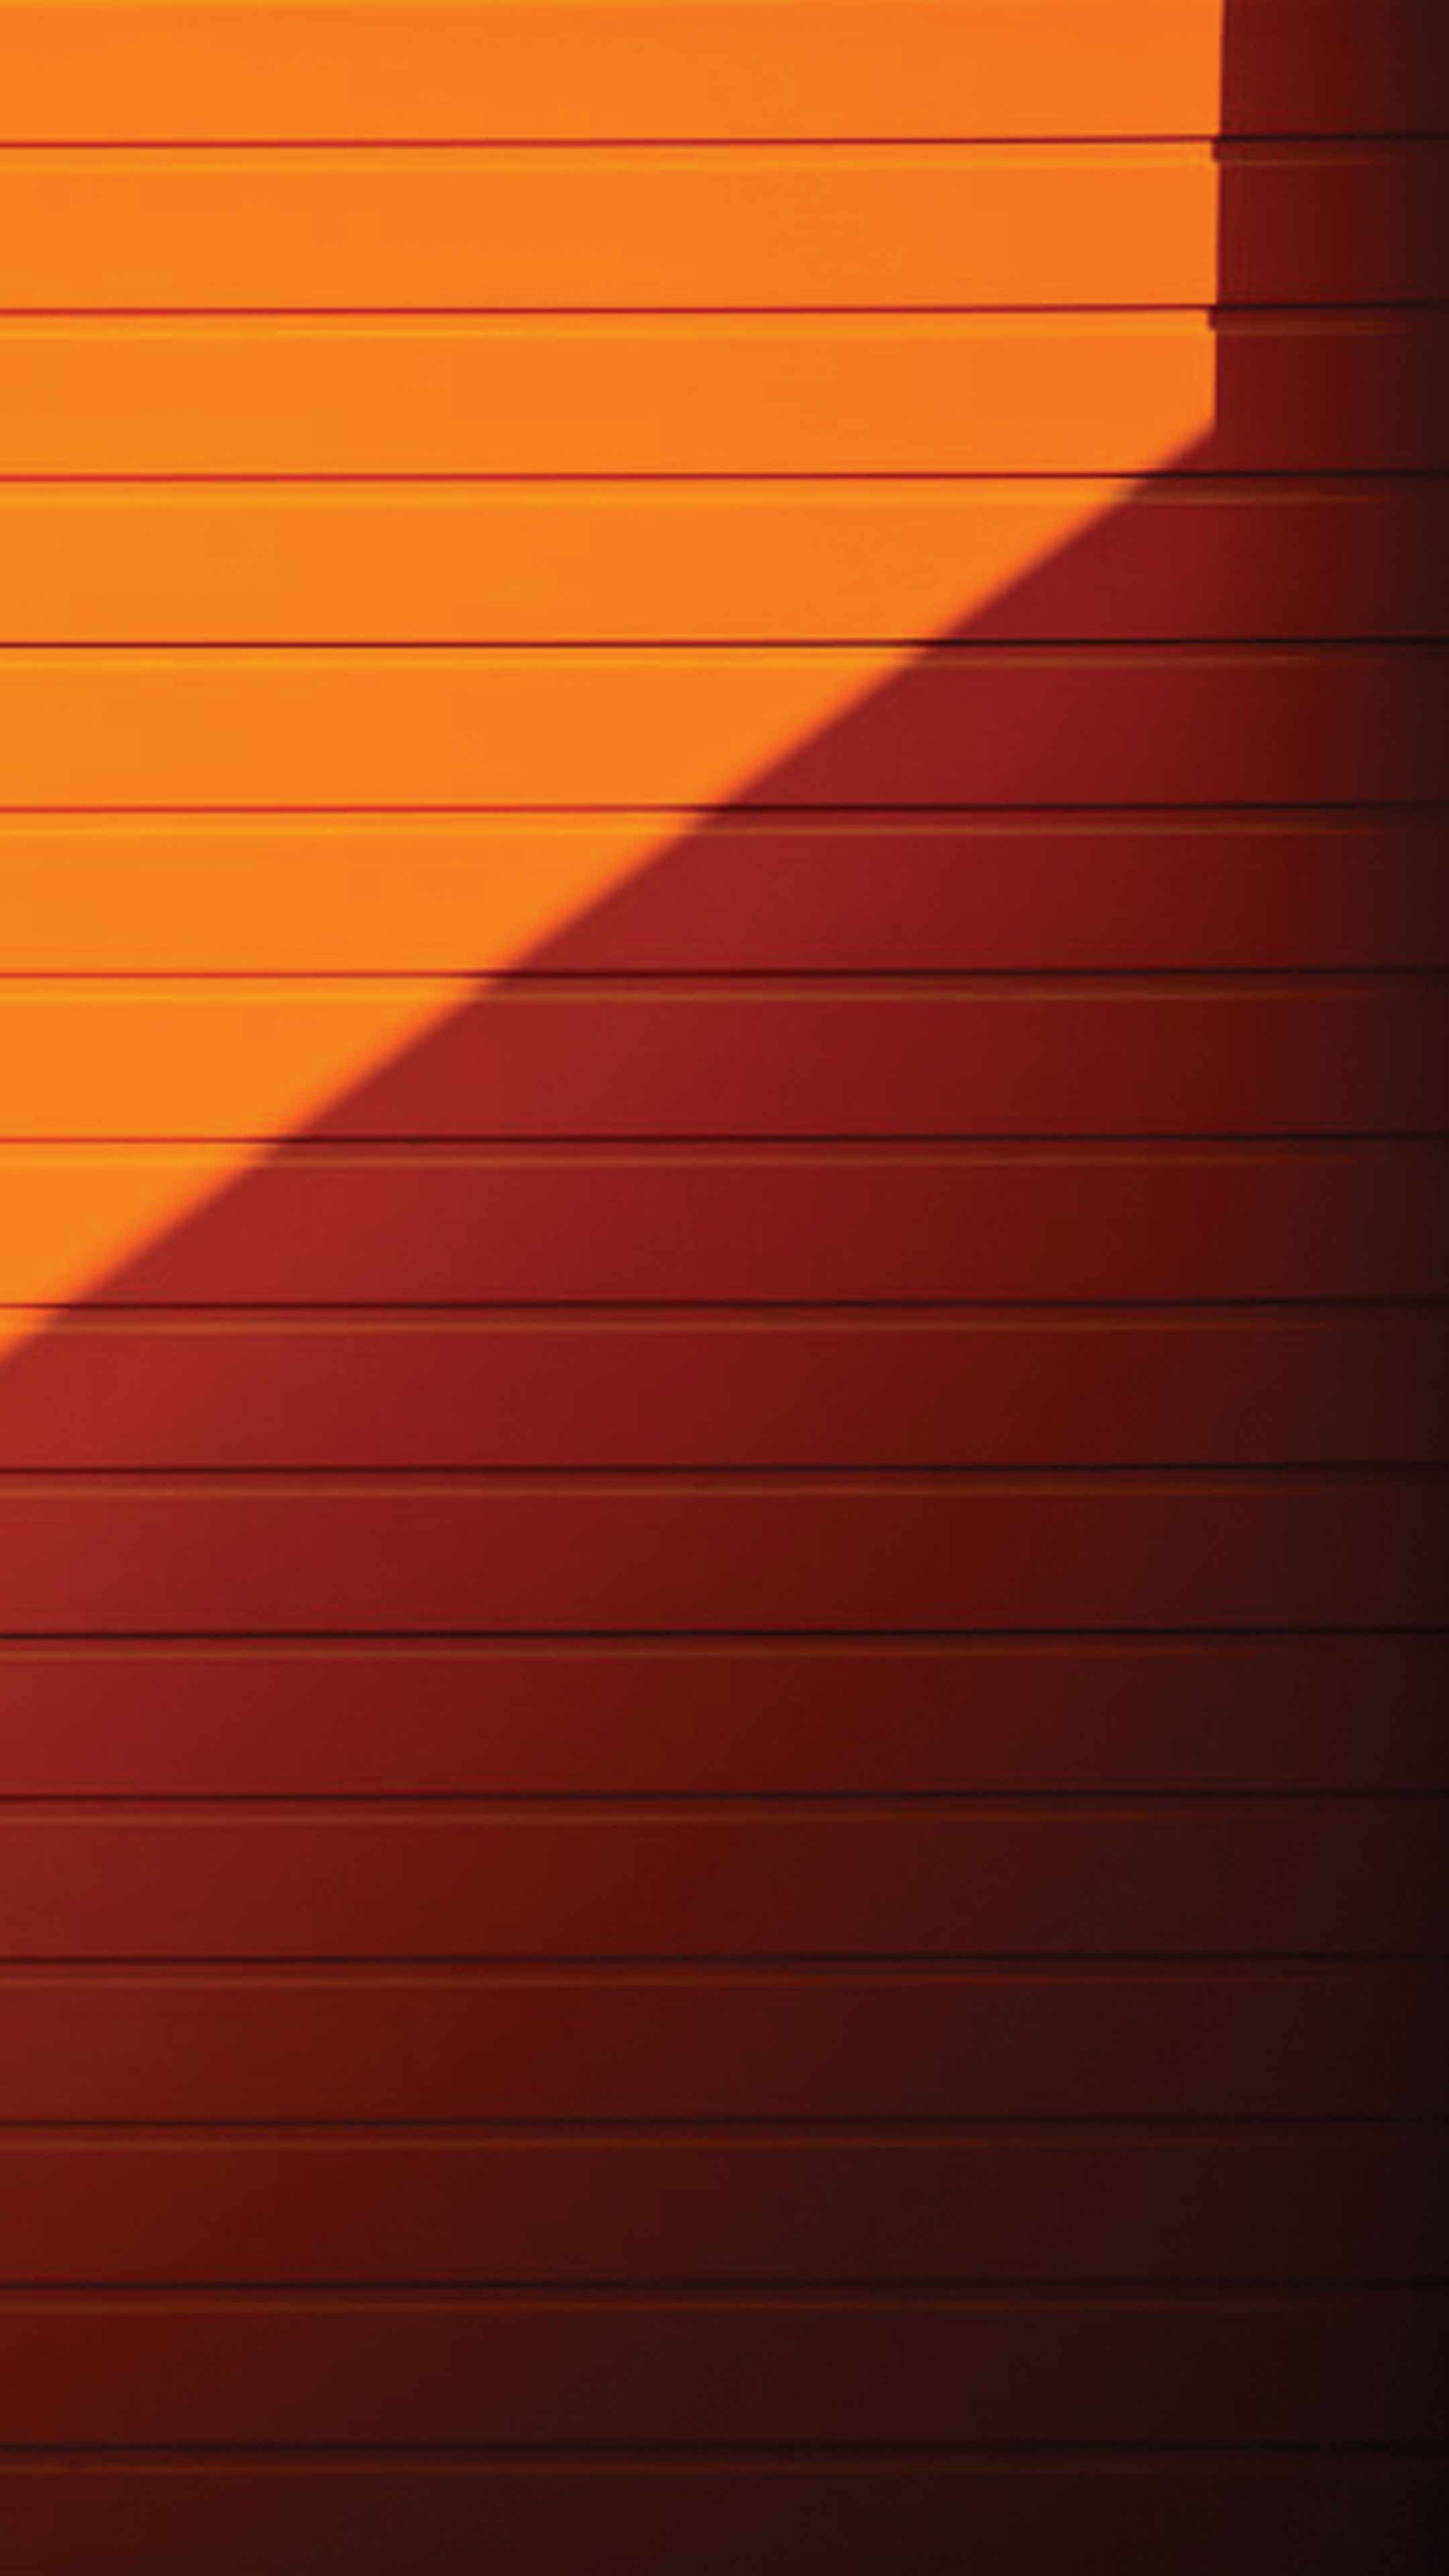 An orange and red sunset casts a shadow on a red wall. - Orange